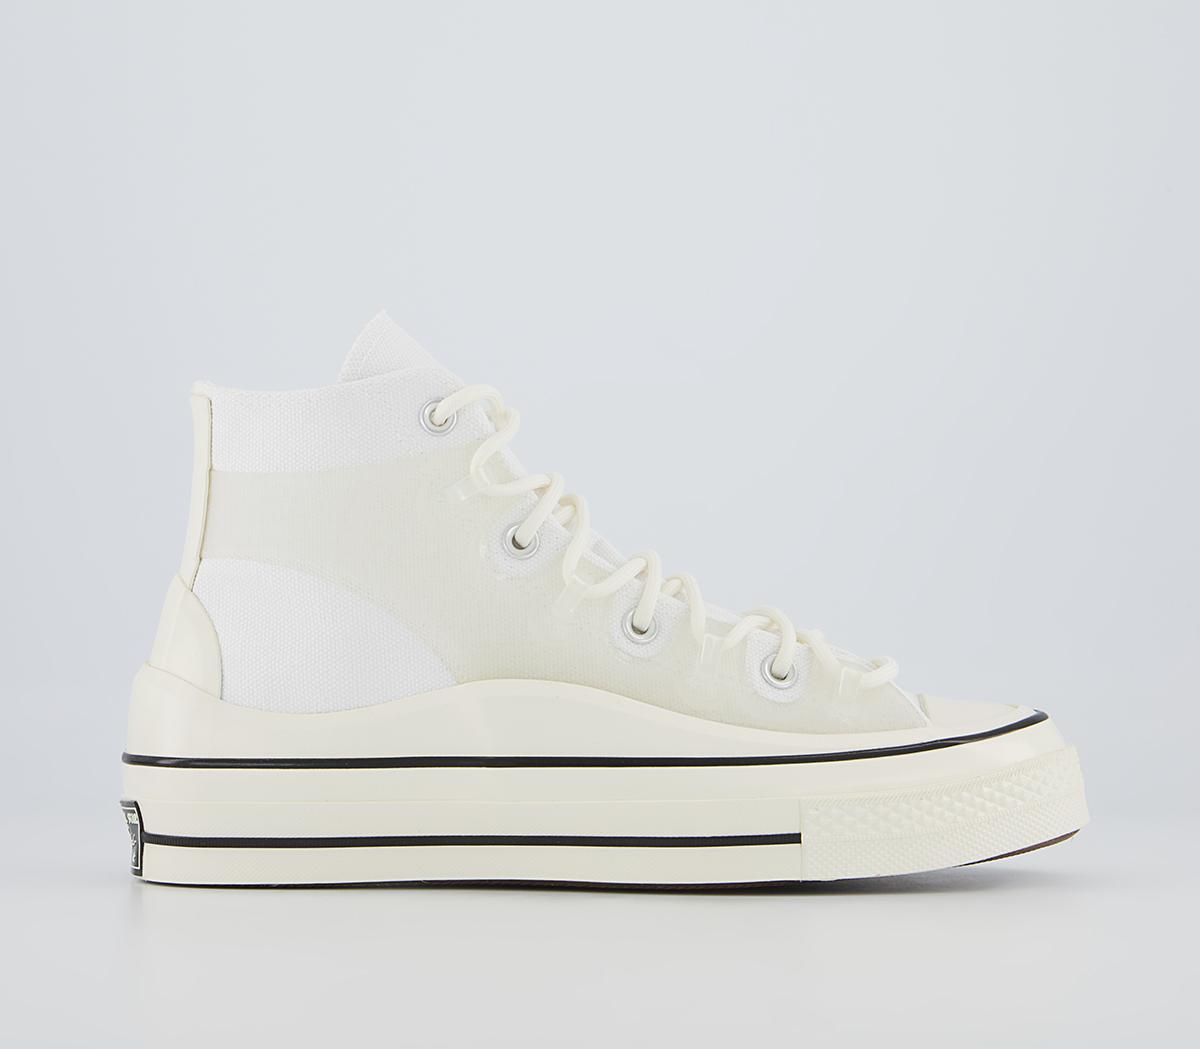 ConverseAll Star Hi 70s TrainersUtility White Translucent Caged